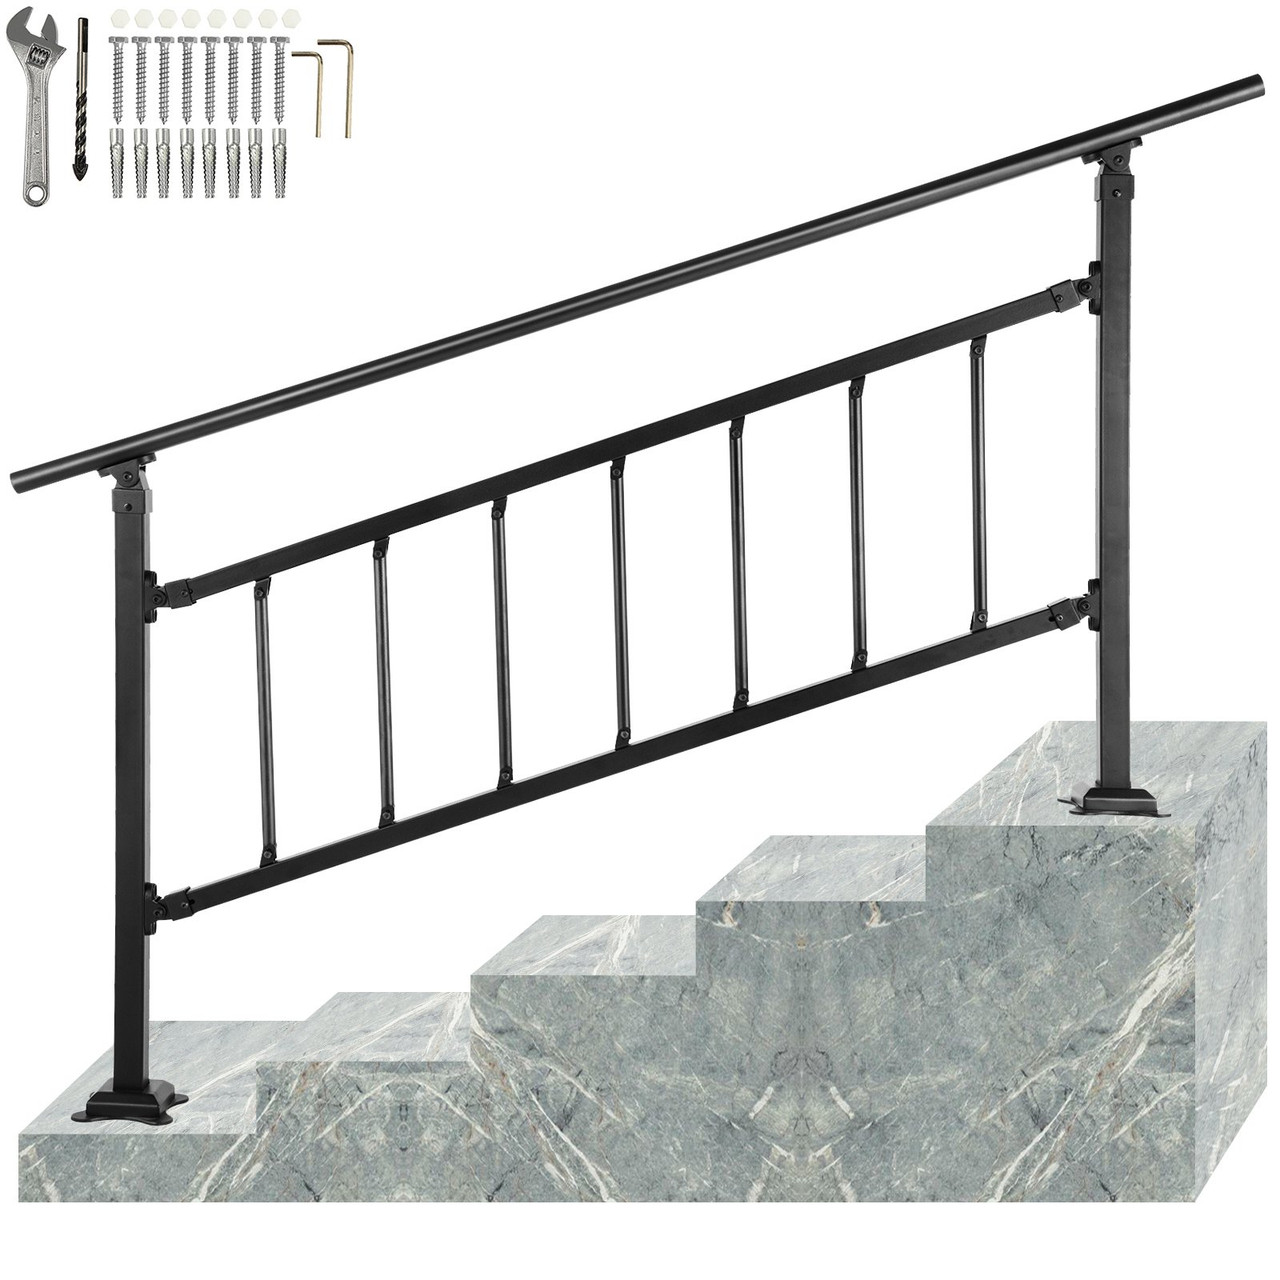 Outdoor Stair Railing, Fits for 1-5 Steps Transitional Wrought Iron Handrail, Adjustable Exterior Stair Railing with Fence, Handrails for Concrete Steps with Installation Kit, Matte Black